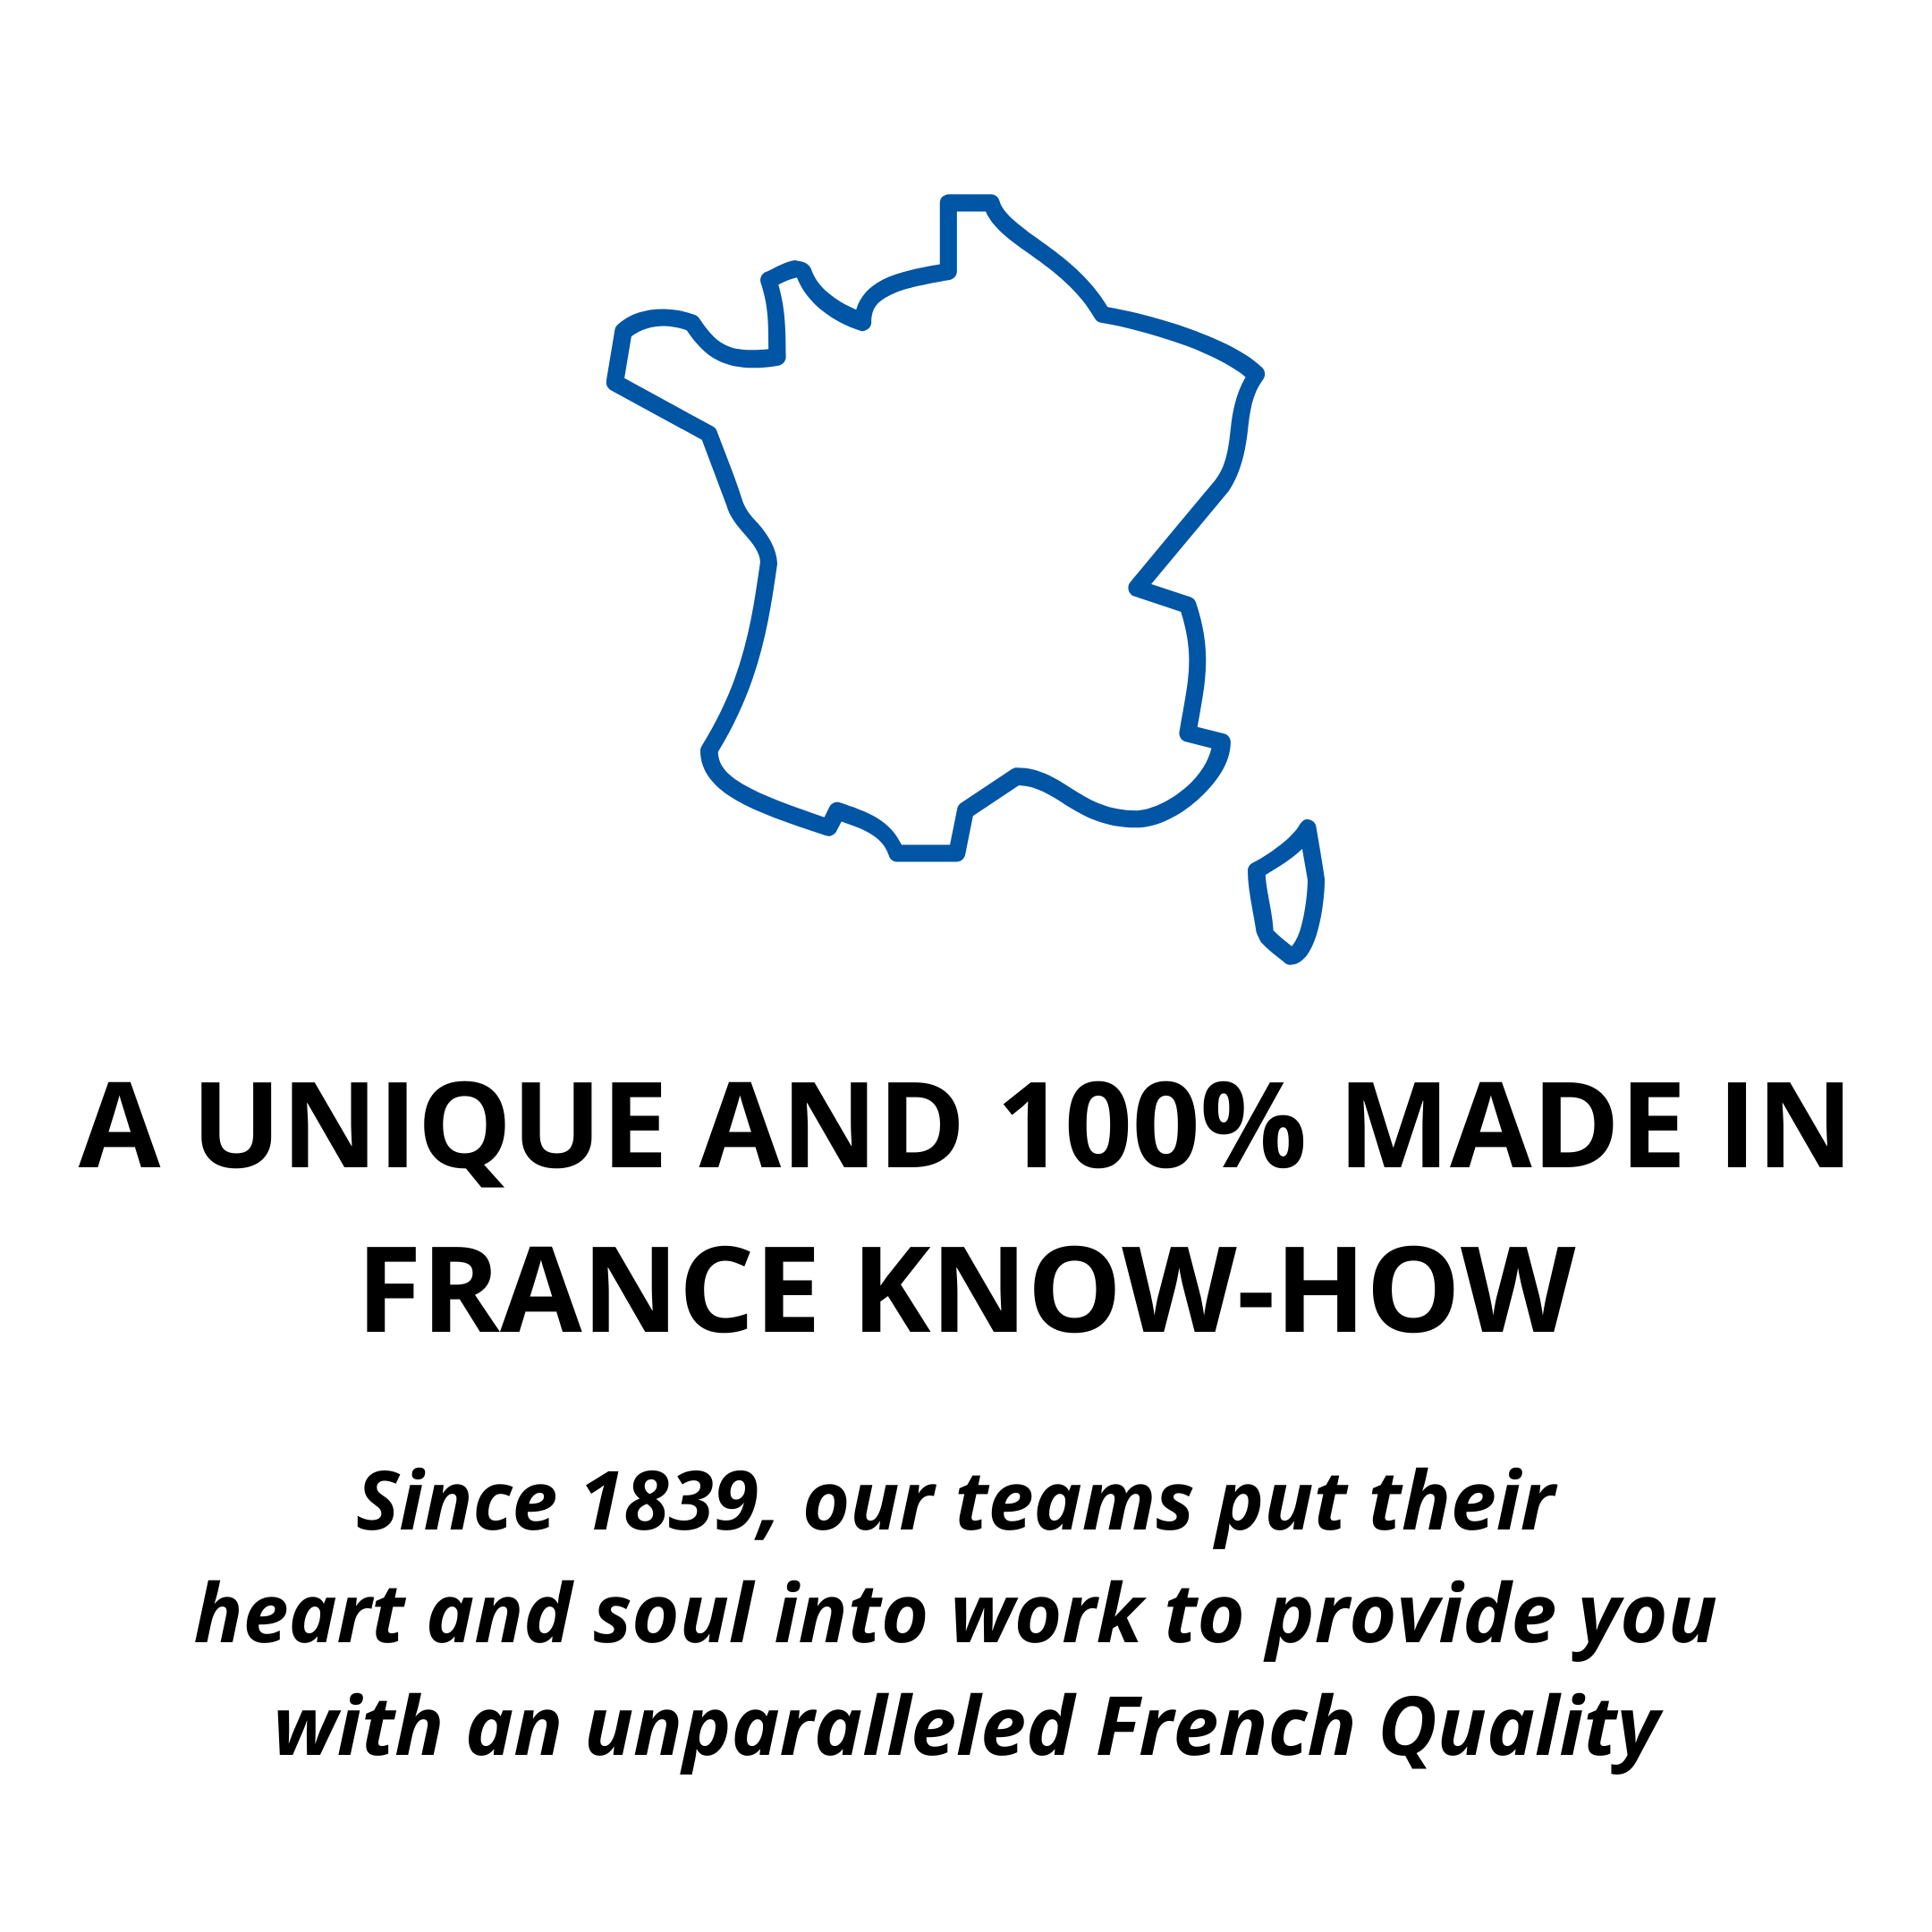 A unique and 100% made in france know-how